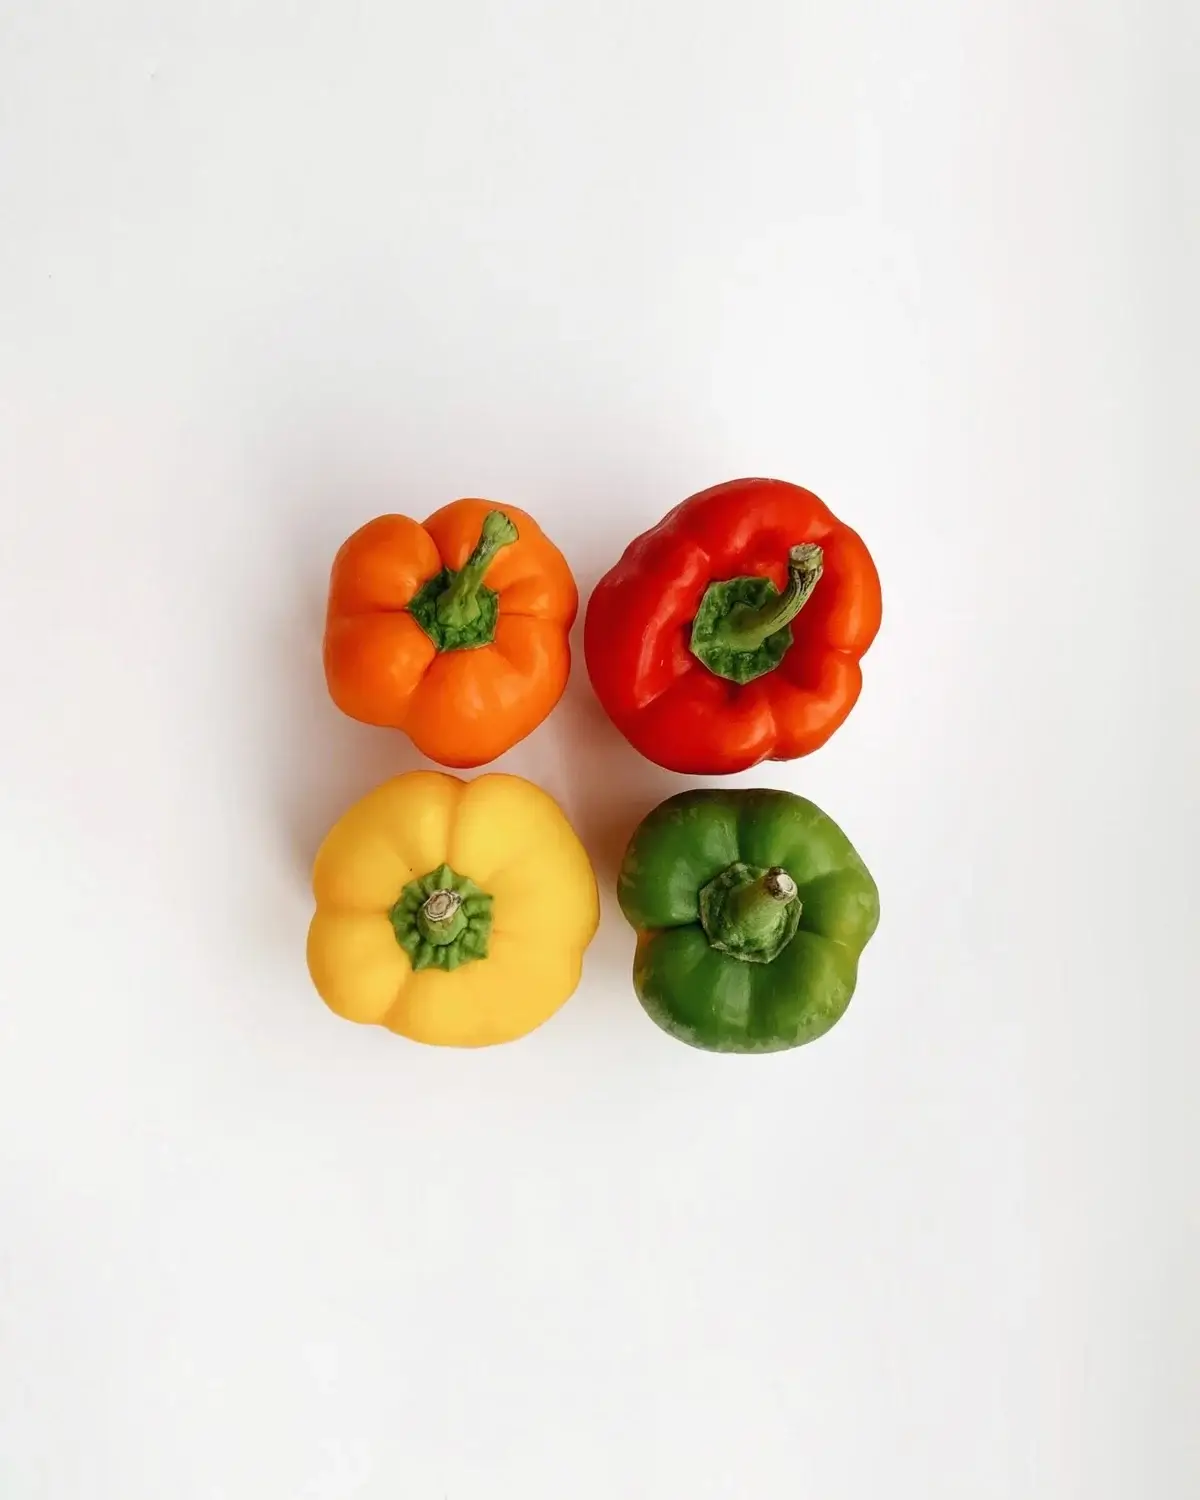 4 capsicums on white surface